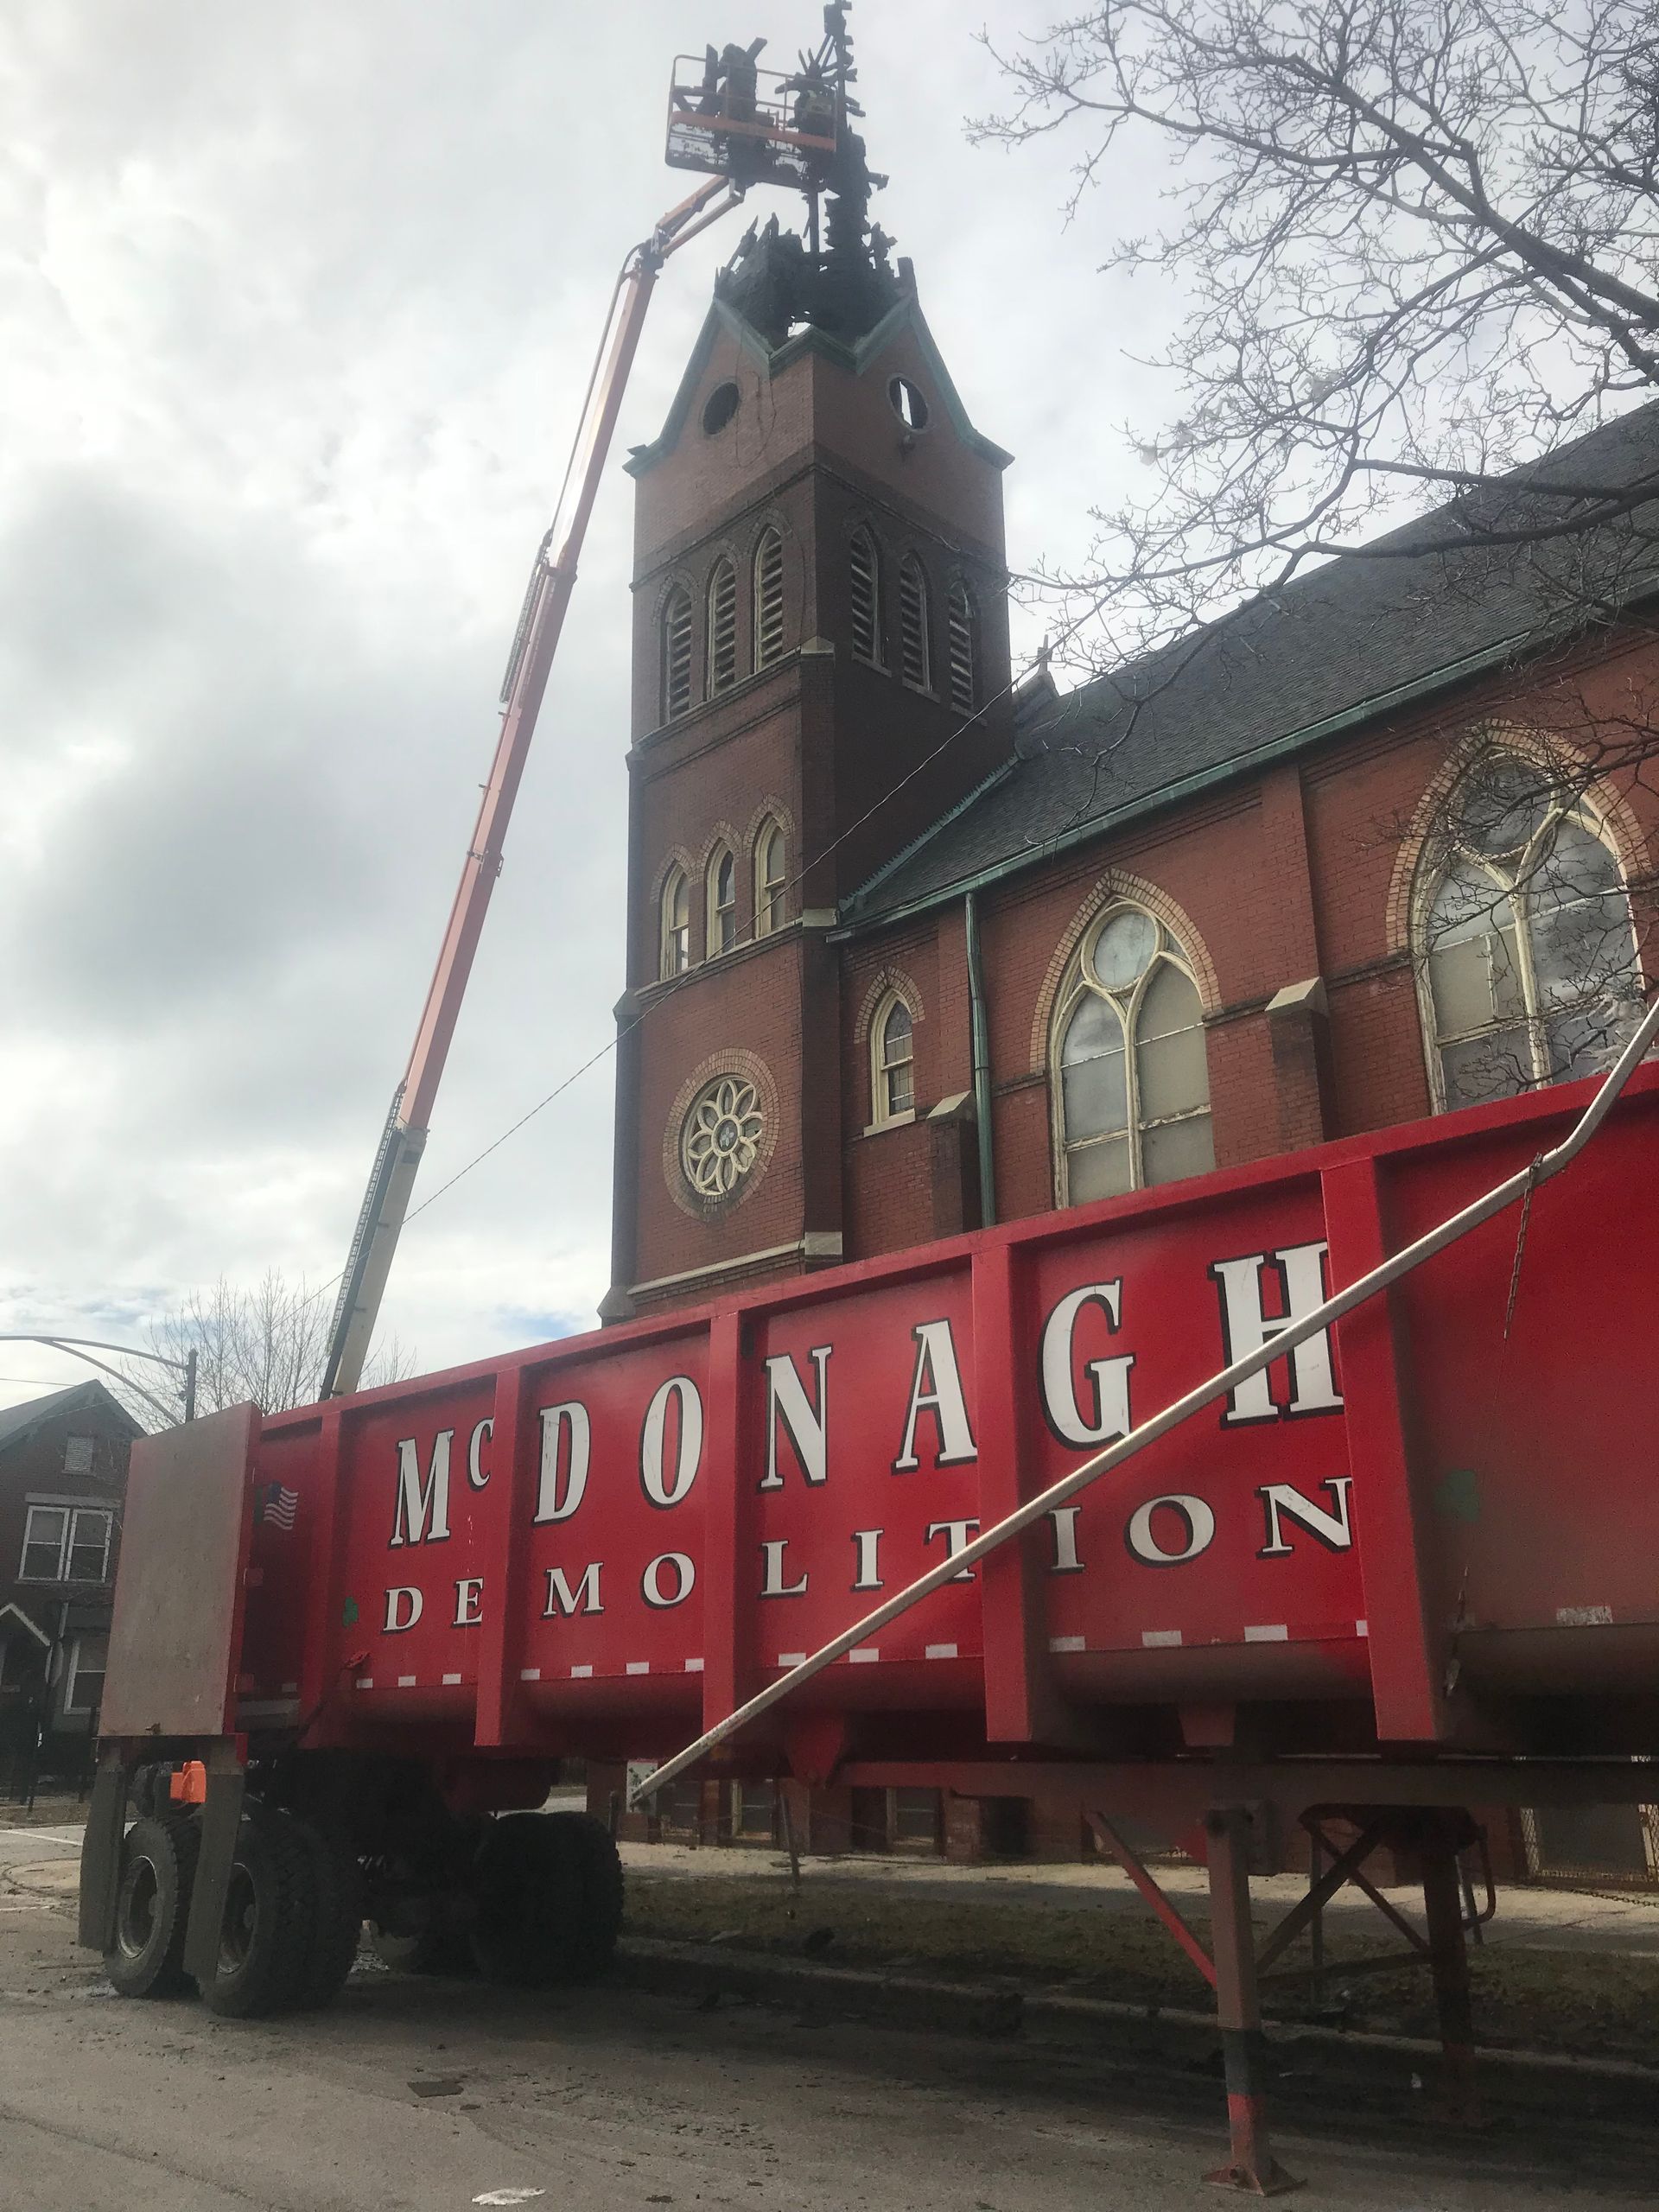 A red demolition truck is parked in front of a church